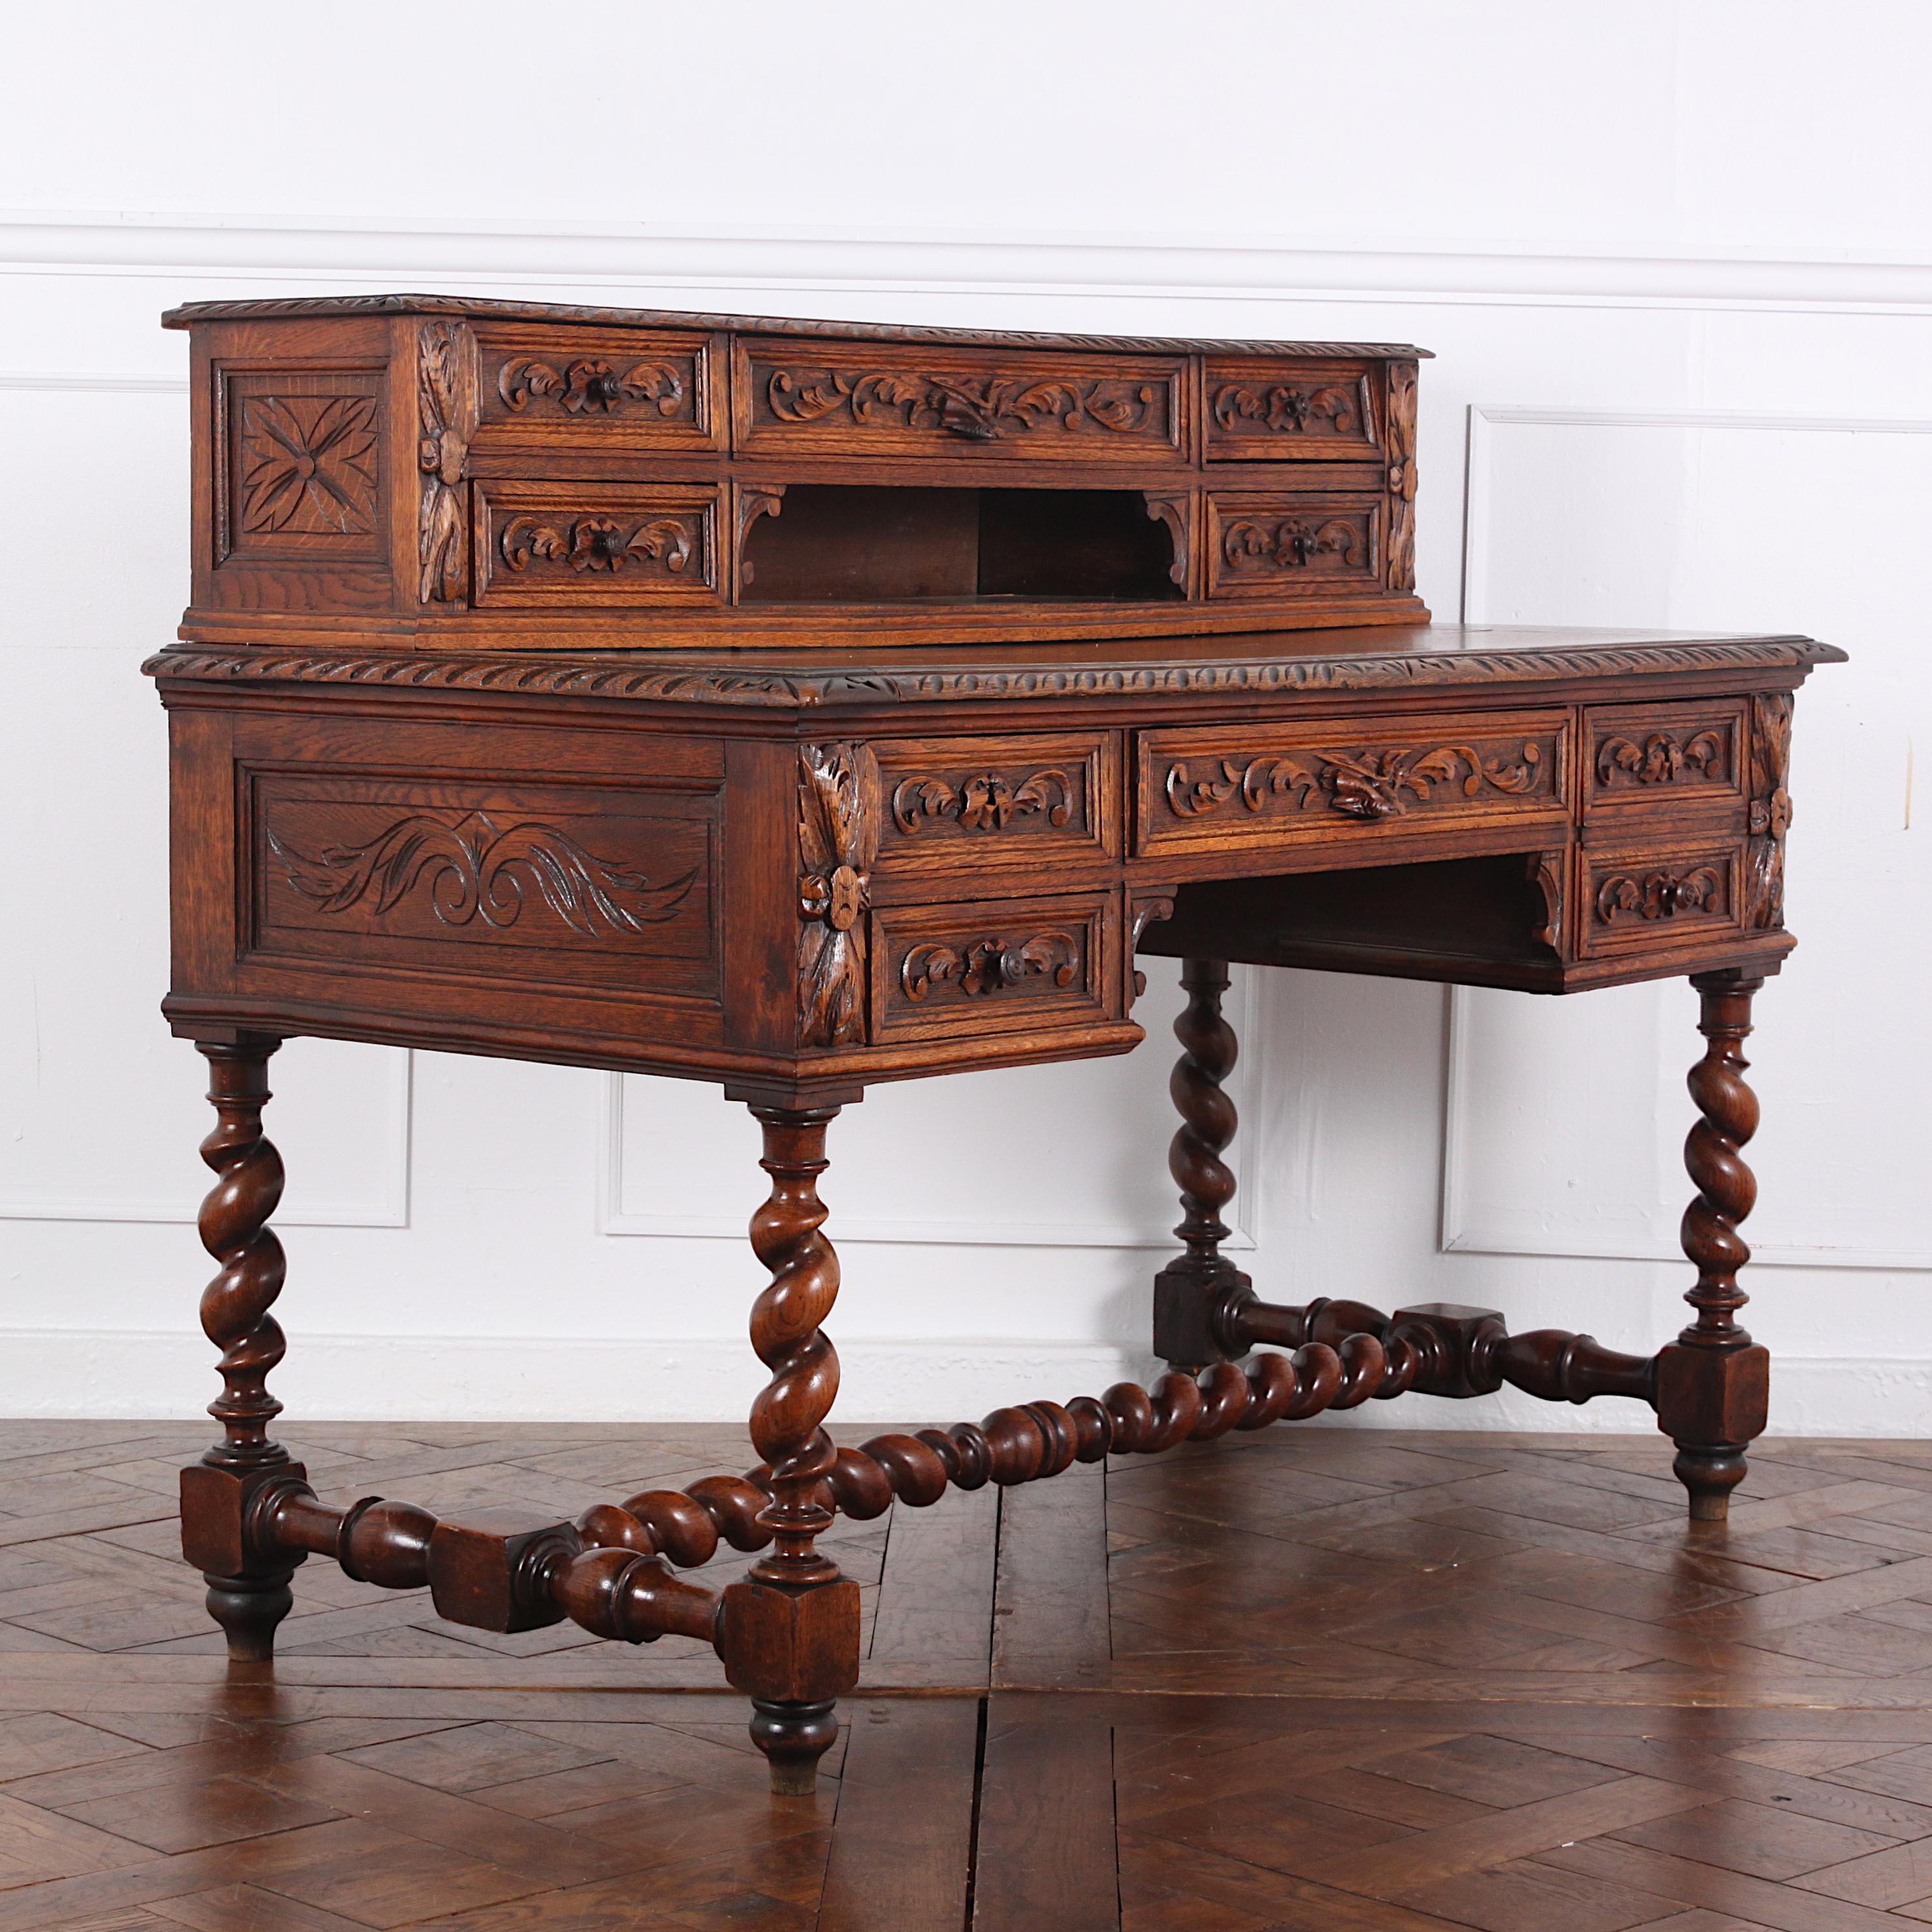 A late 19th century heavily carved French ‘Henri II’ or Renaissance Revival style desk, the case with carved paneled sides and with five carved drawers. A further five smaller carved drawers are fitted to the upper superstructure. The desk sits on